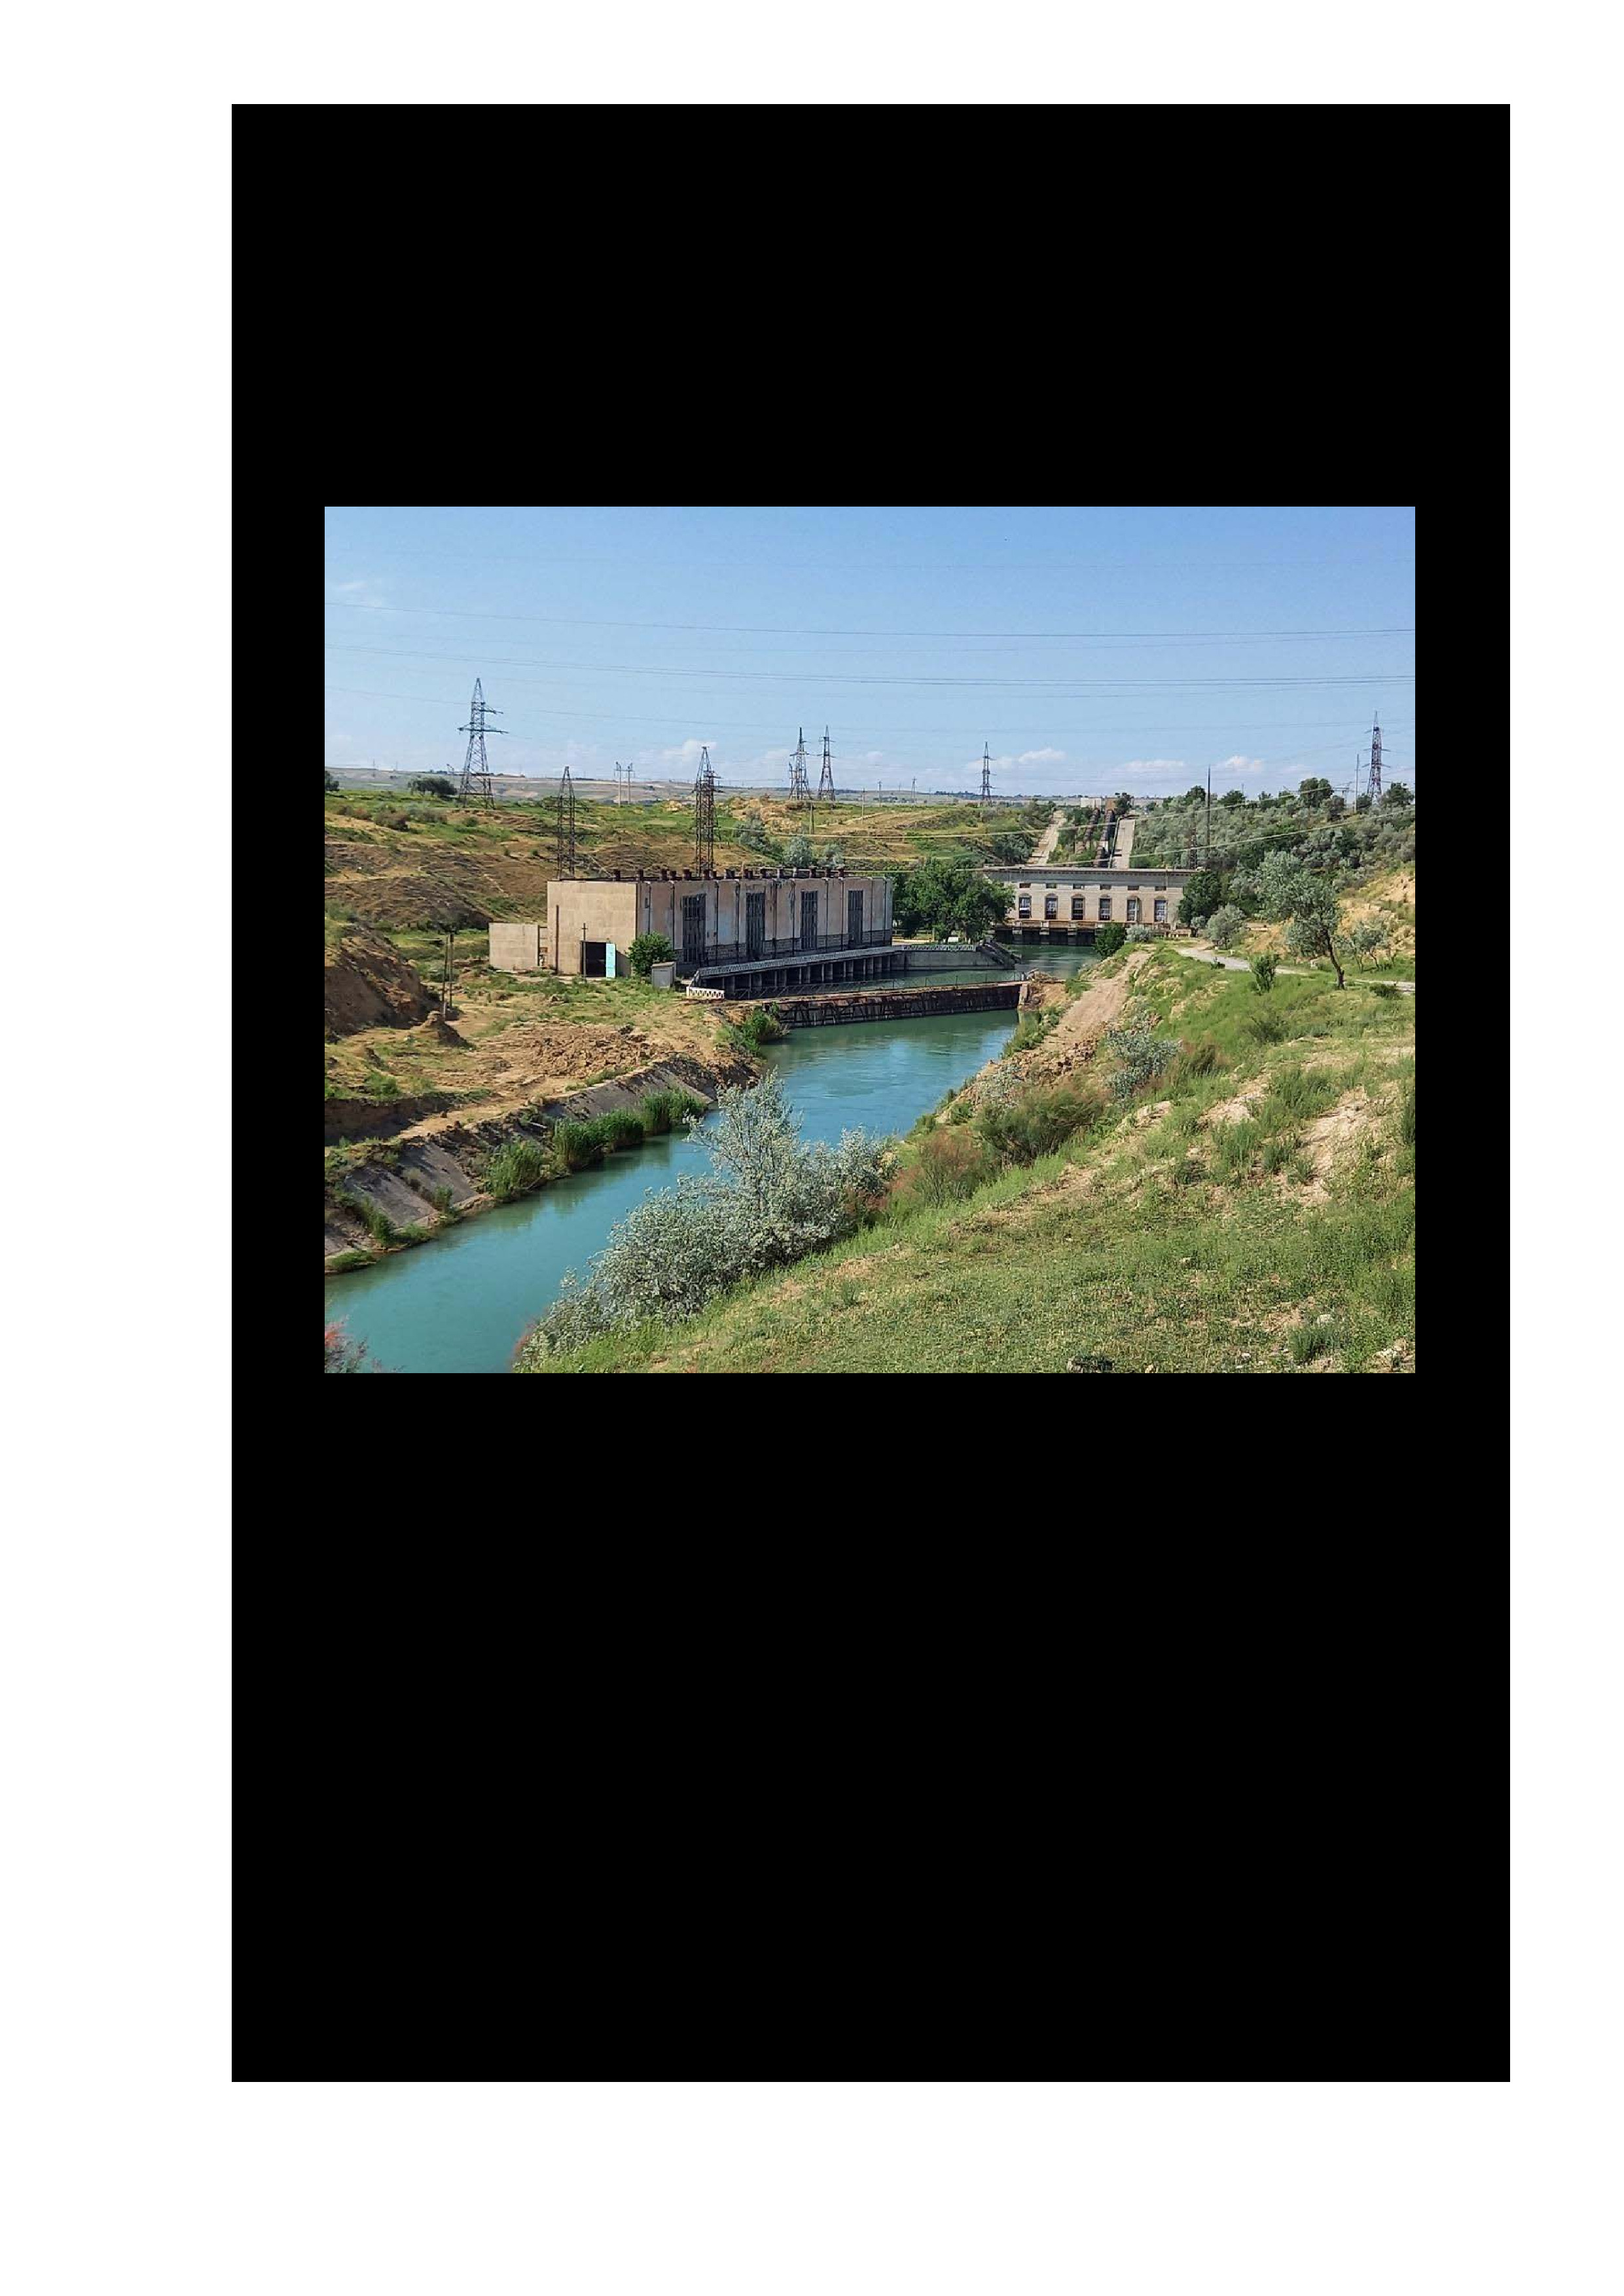 Article: Ensuring food security through improved efficiency of pumping stations in Sughd province of Tajikistan 2022 | A.Kushanova